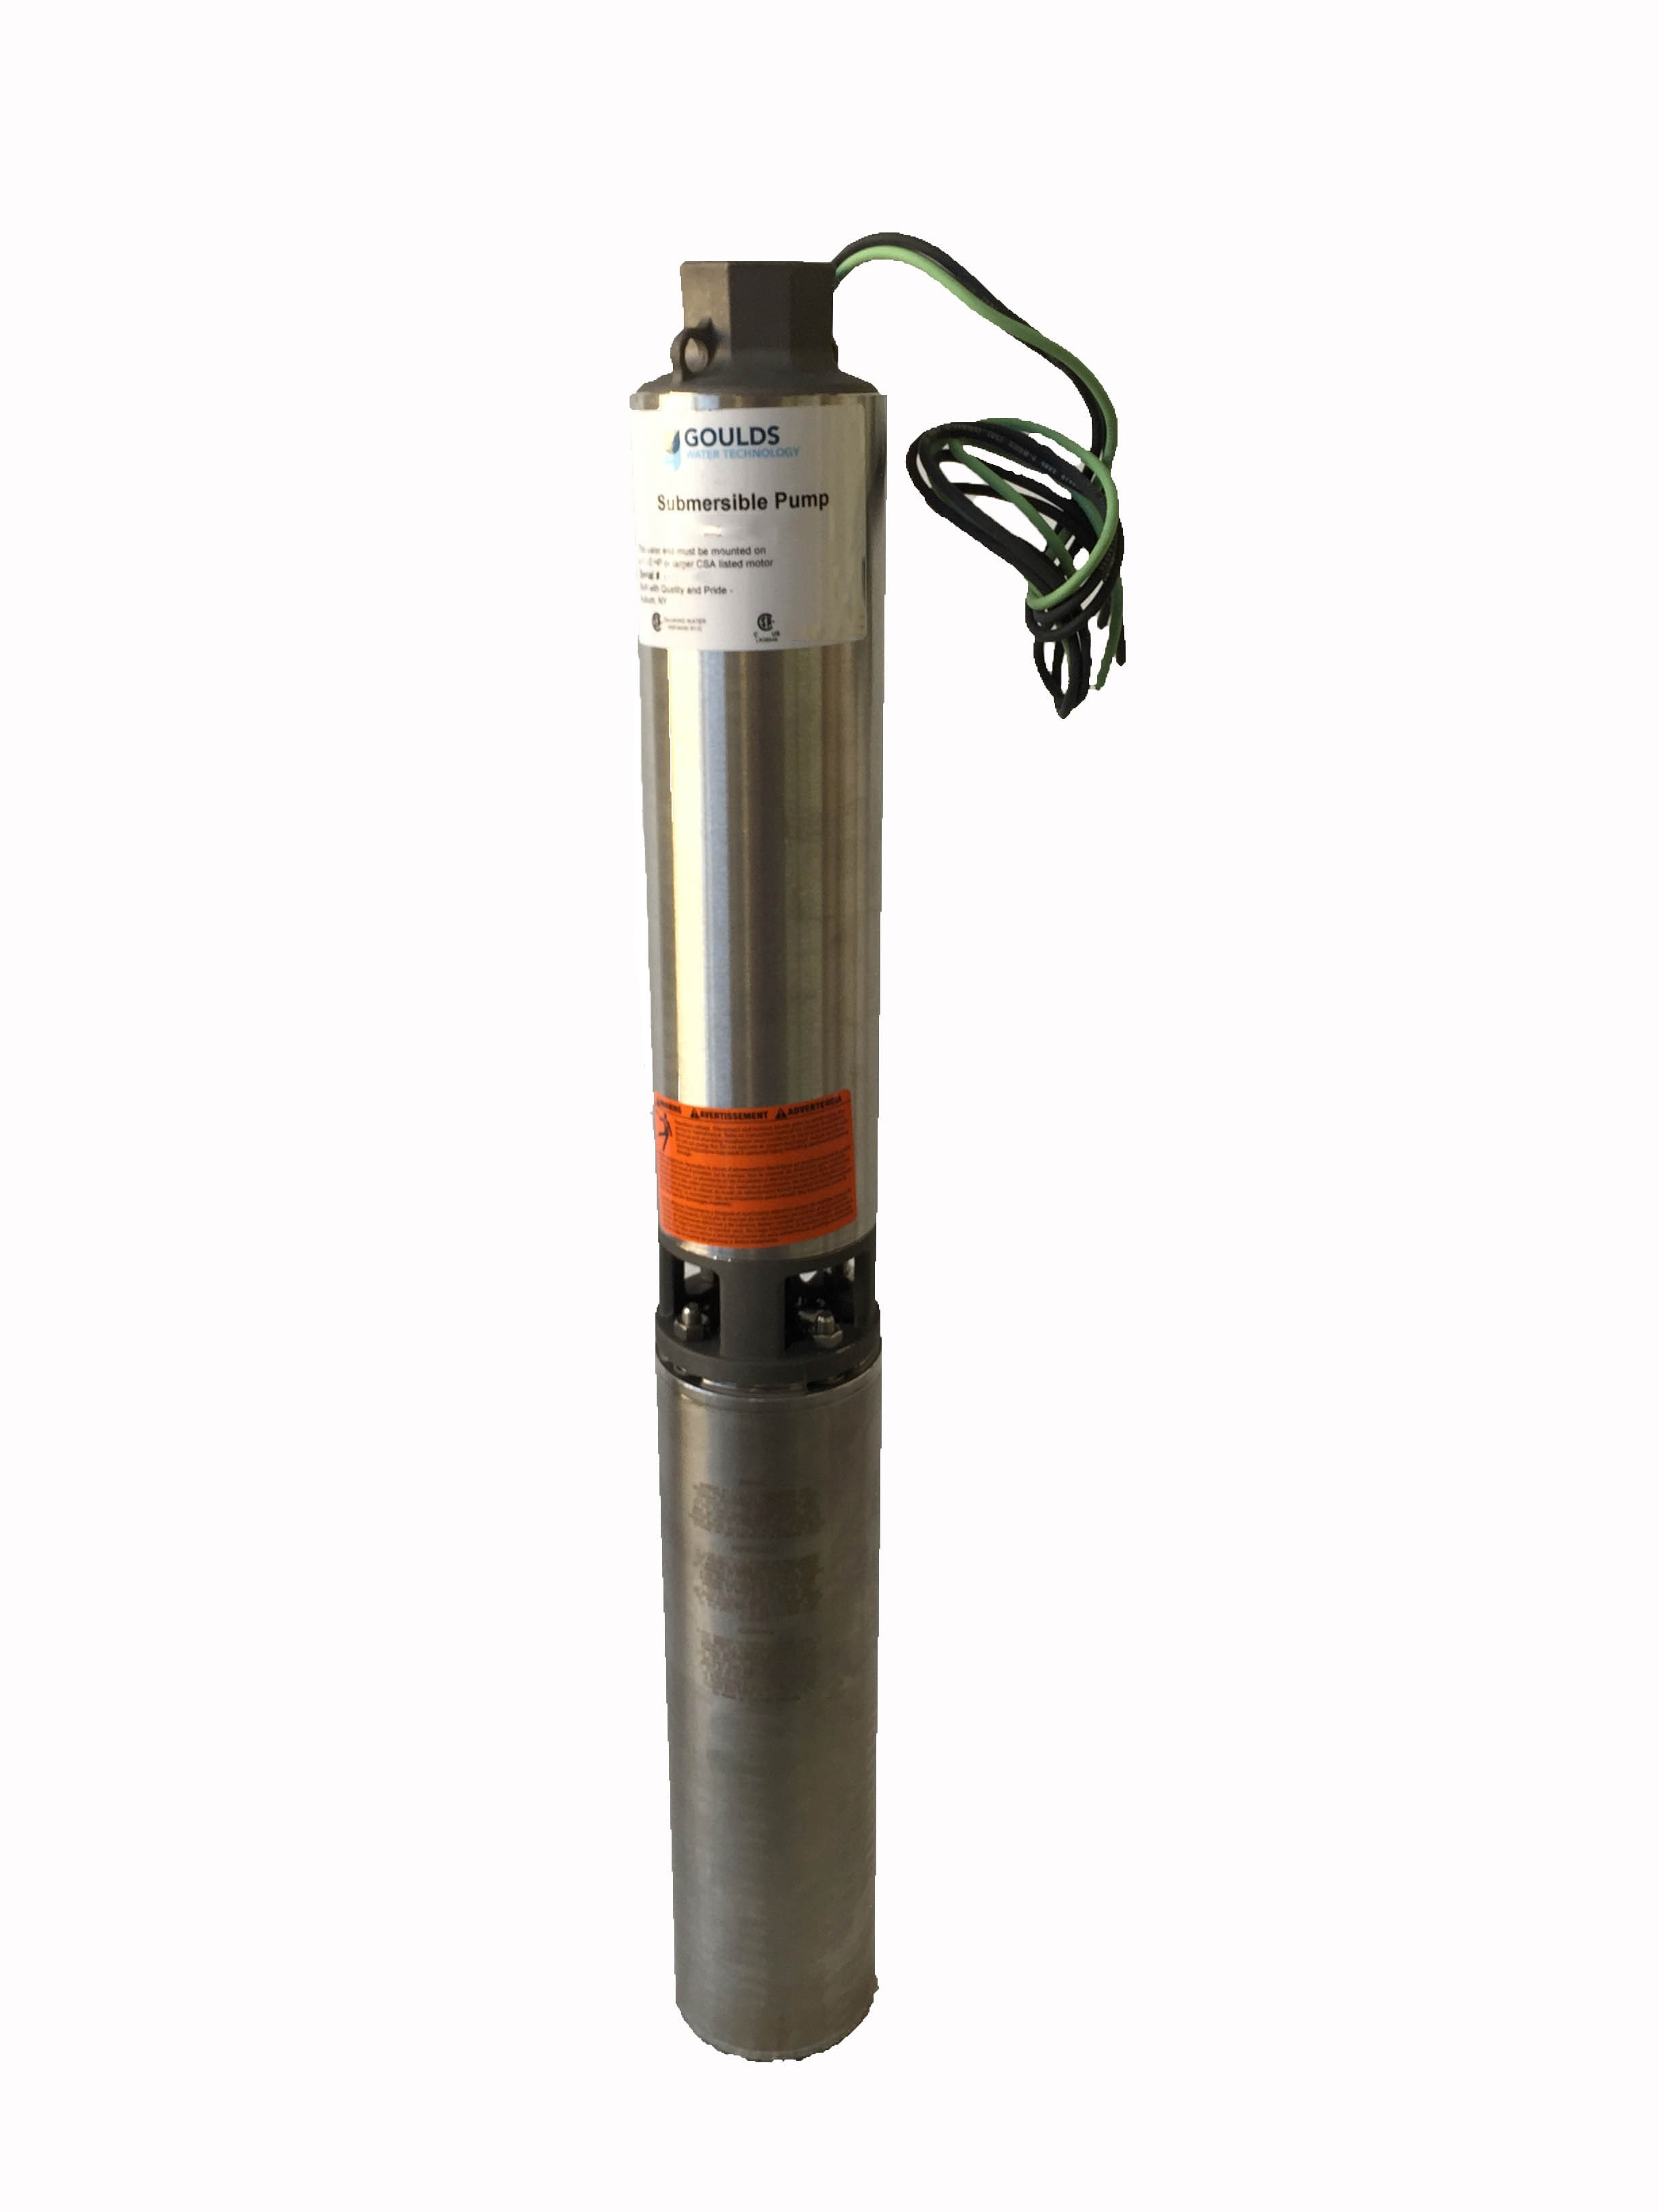 Goulds 10GS10422C 10GPM 1HP 230V 2 Wire Submersible Well Pump